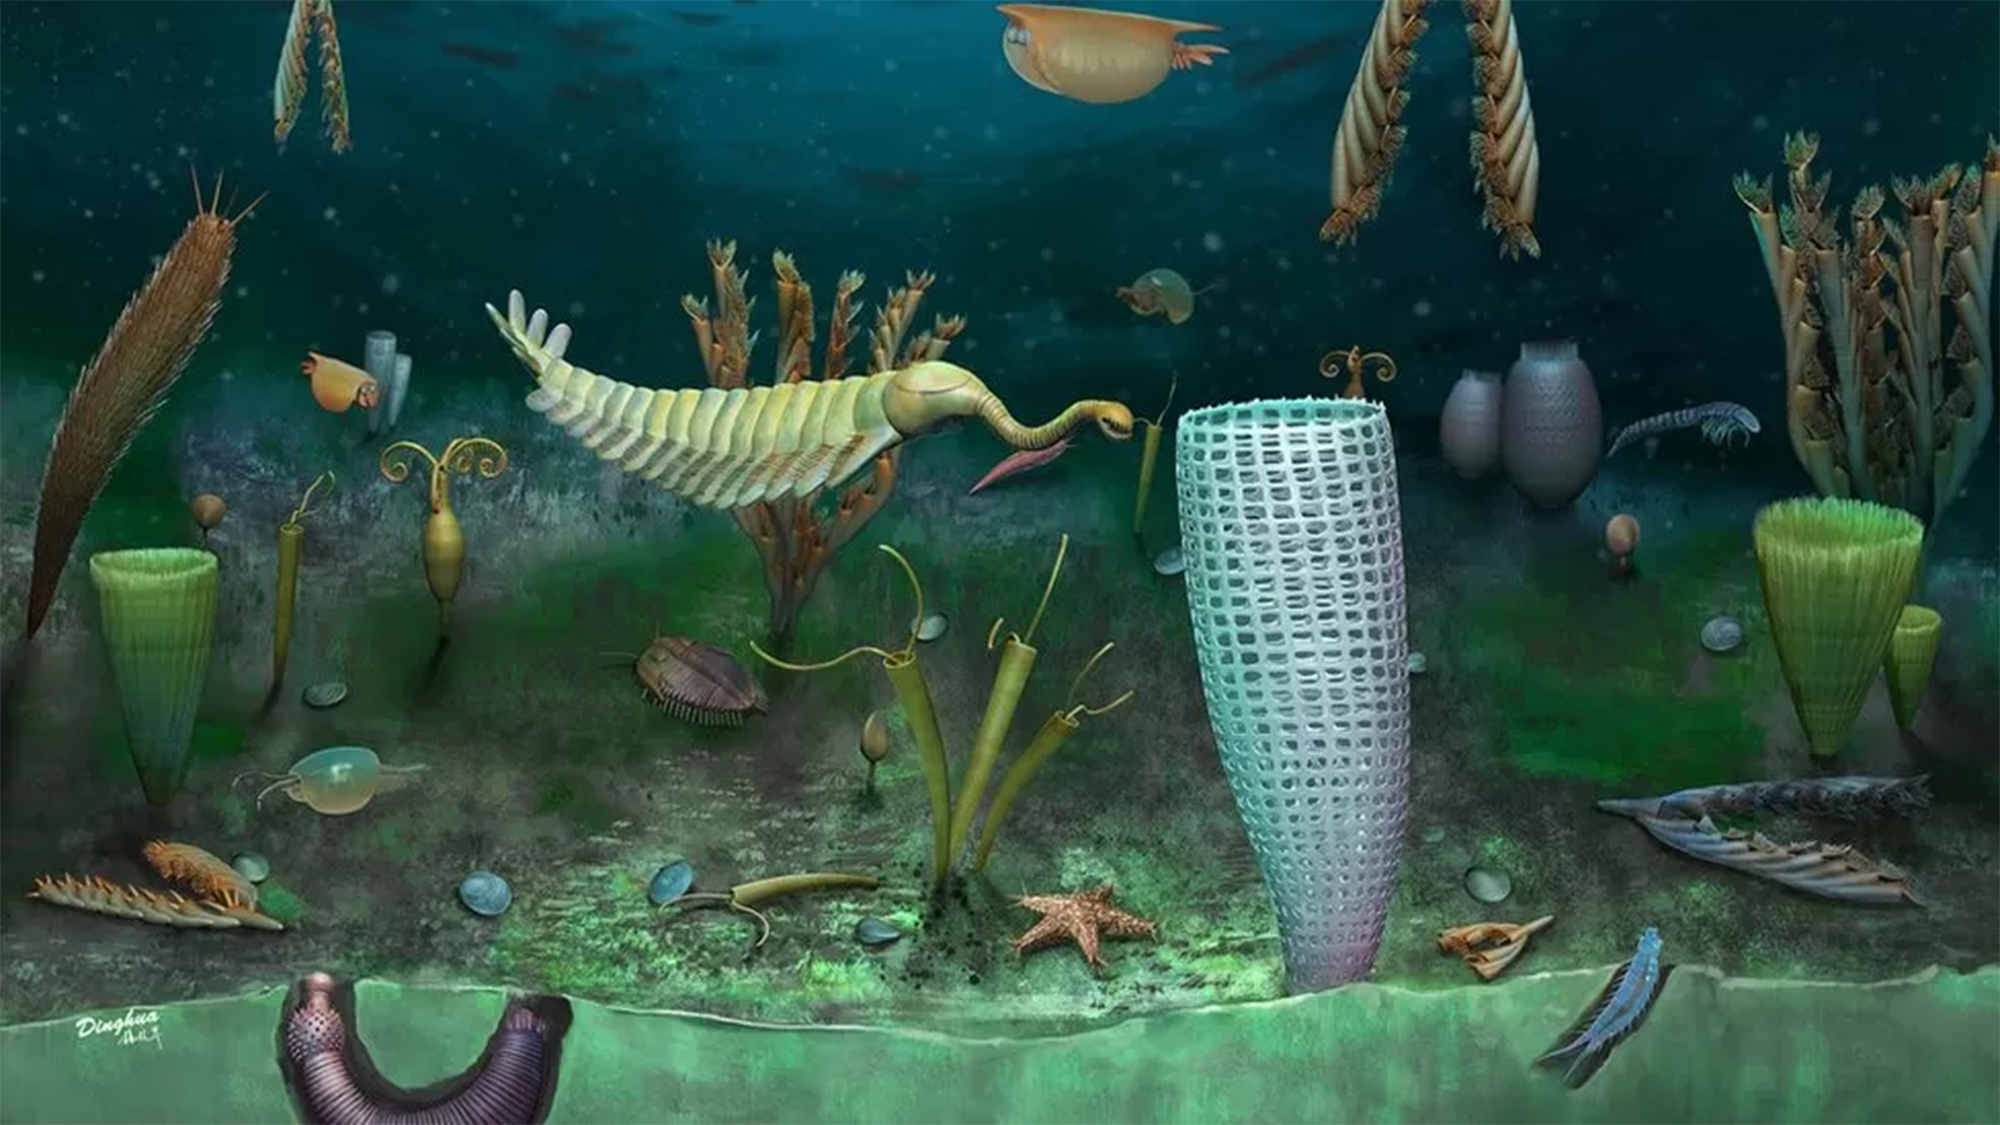 Fossil trove in Wales is a 462-million-year-old world of wee sea creatures